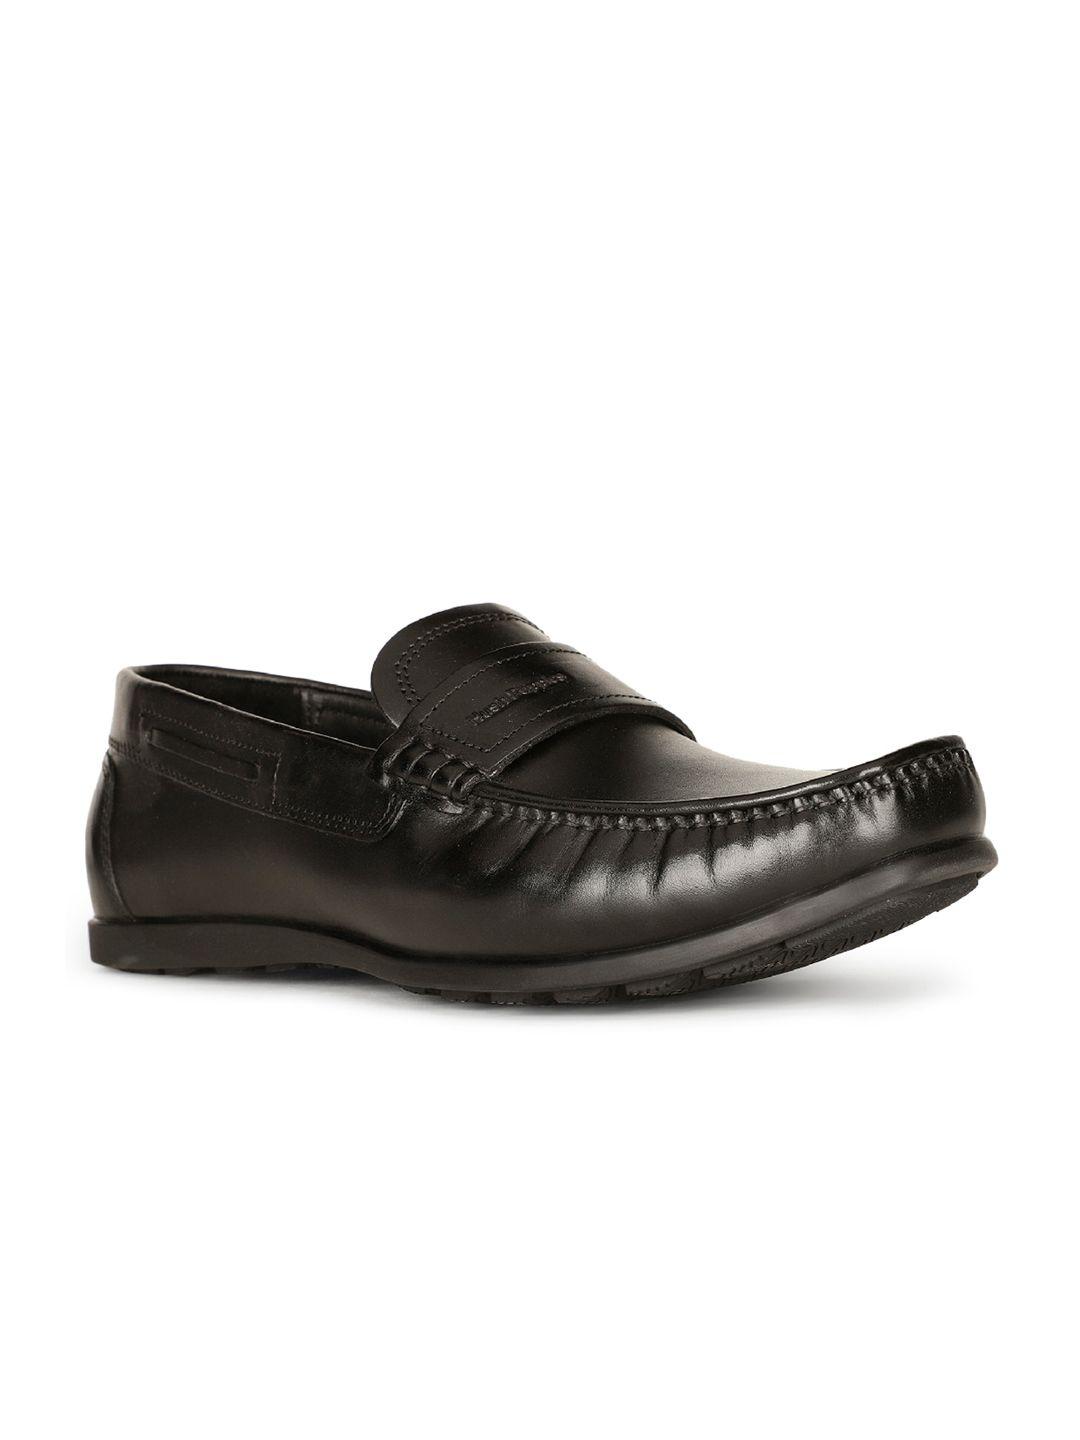 hush-puppies-men-square-toe-leather-comfort-insole-penny-loafers